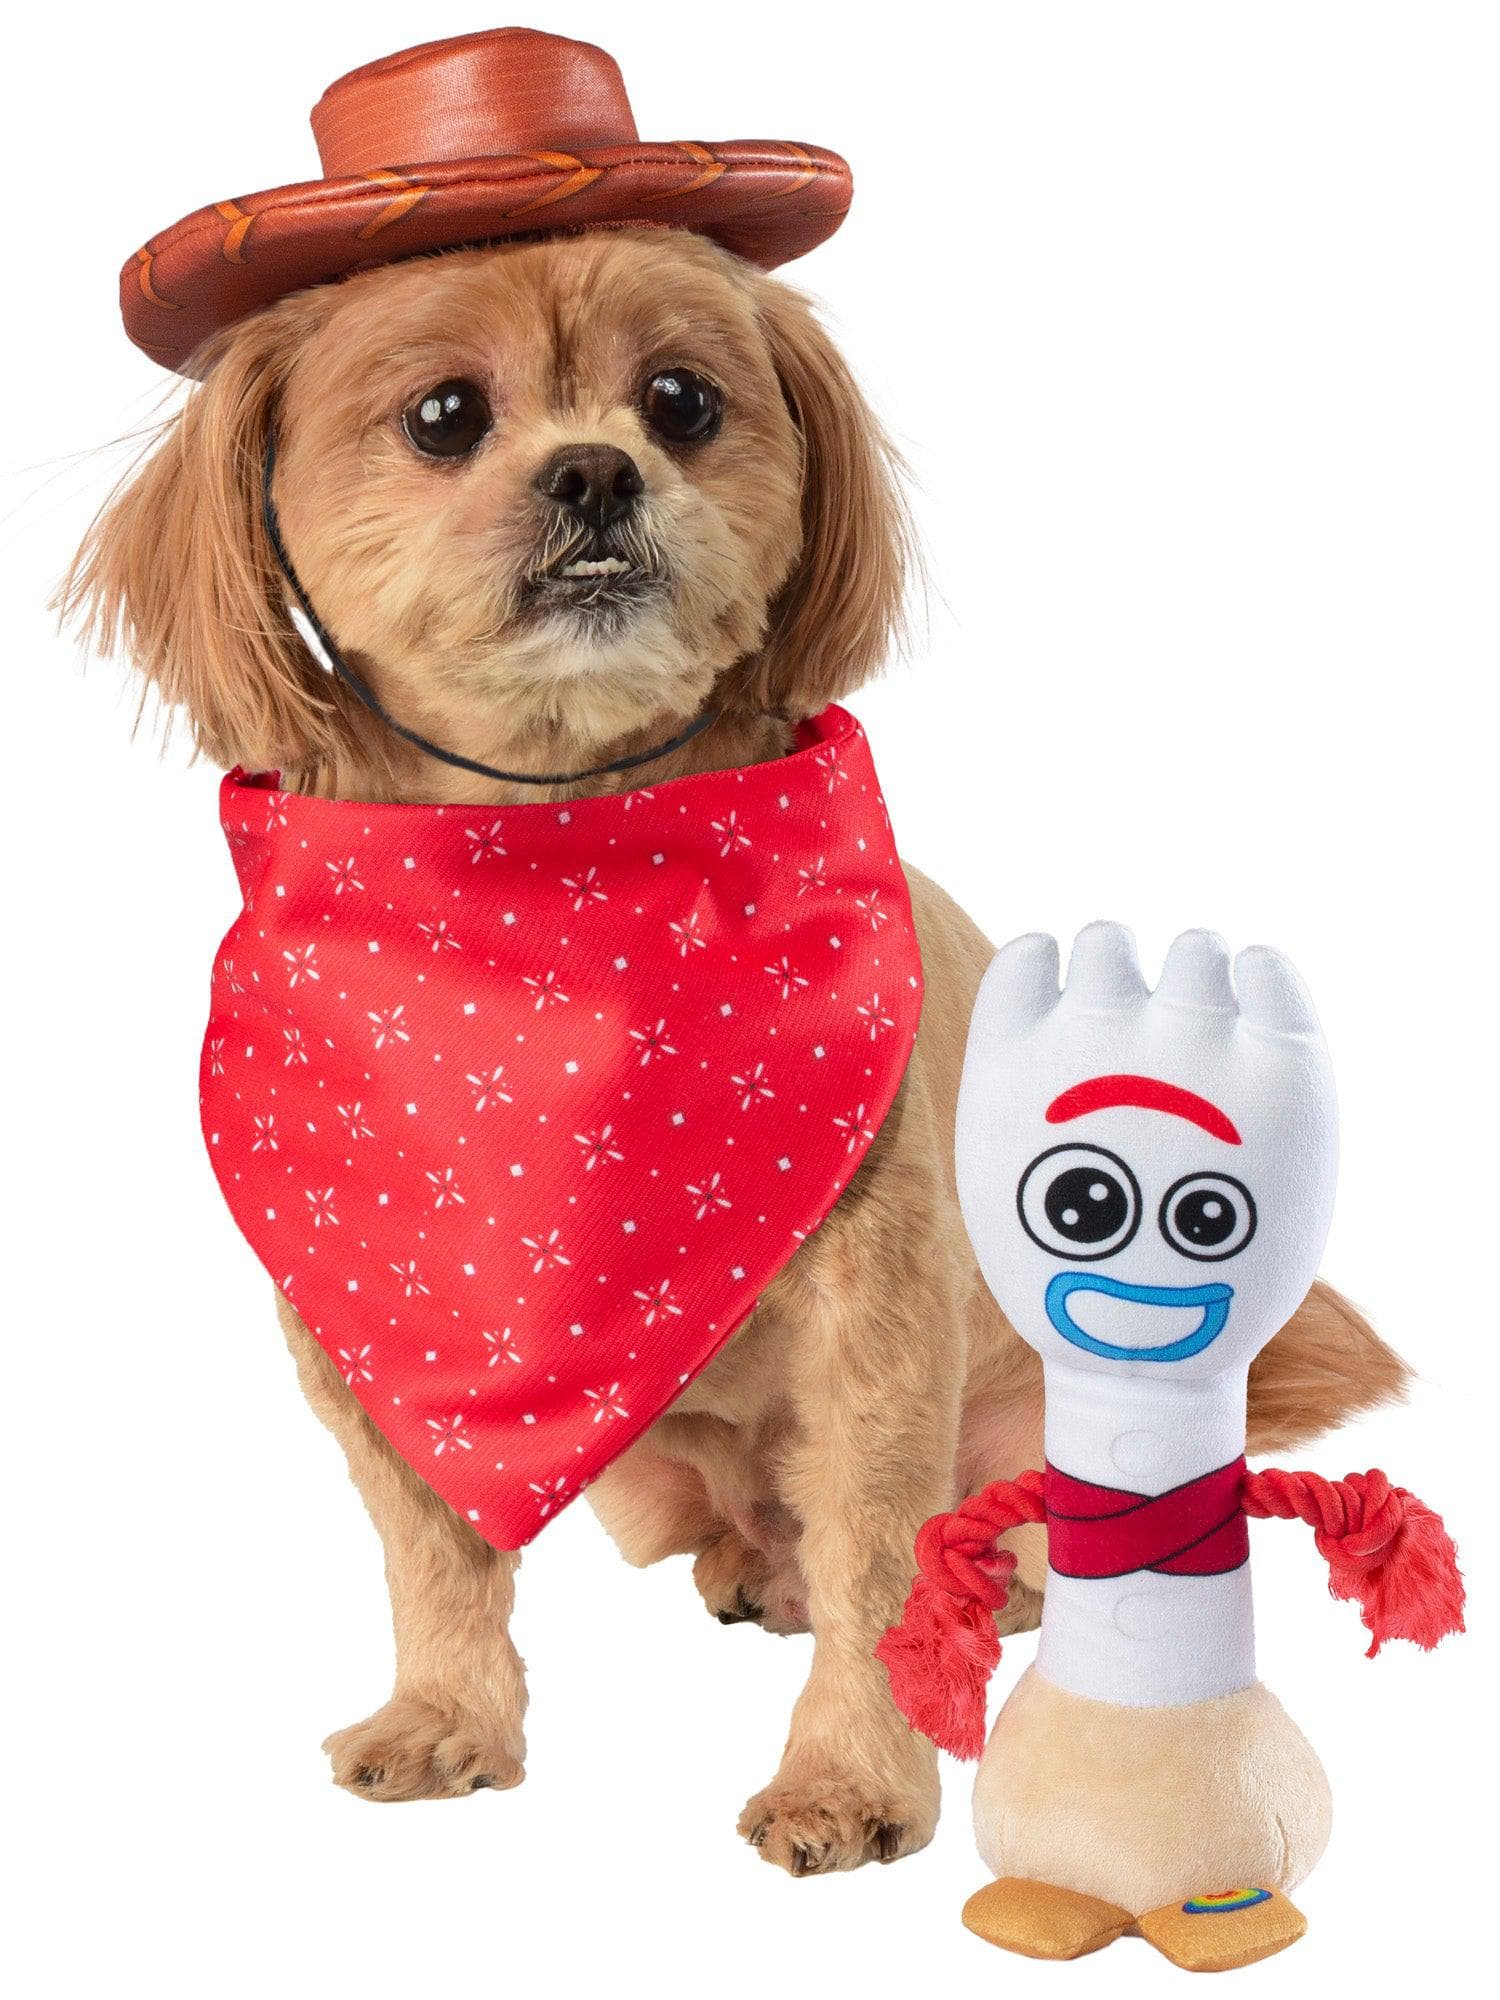 Toy Story Woody Pet Headpiece, Bandana and Forky Toy - costumes.com